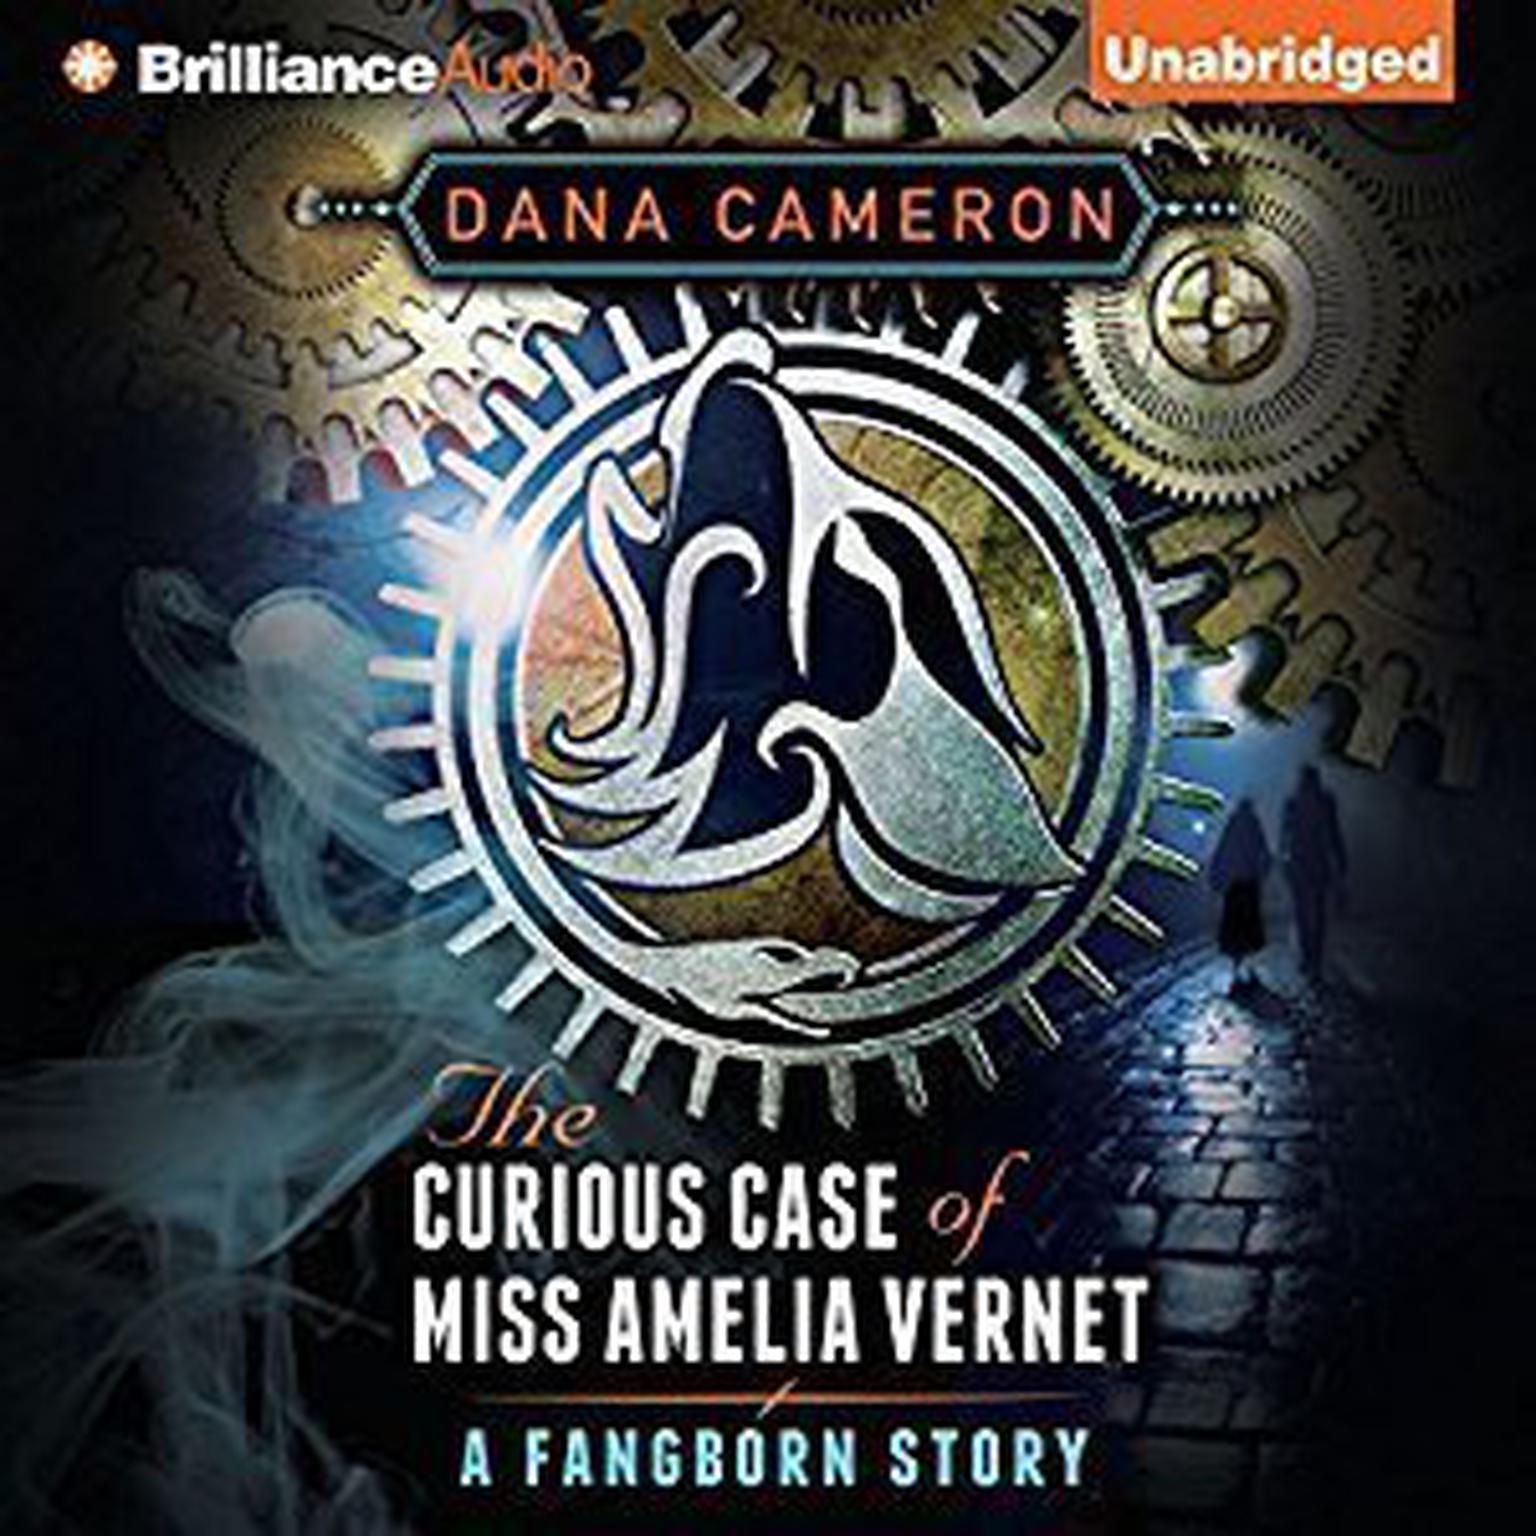 The Curious Case of Miss Amelia Vernet: A Fangborn Story Audiobook, by Dana Cameron